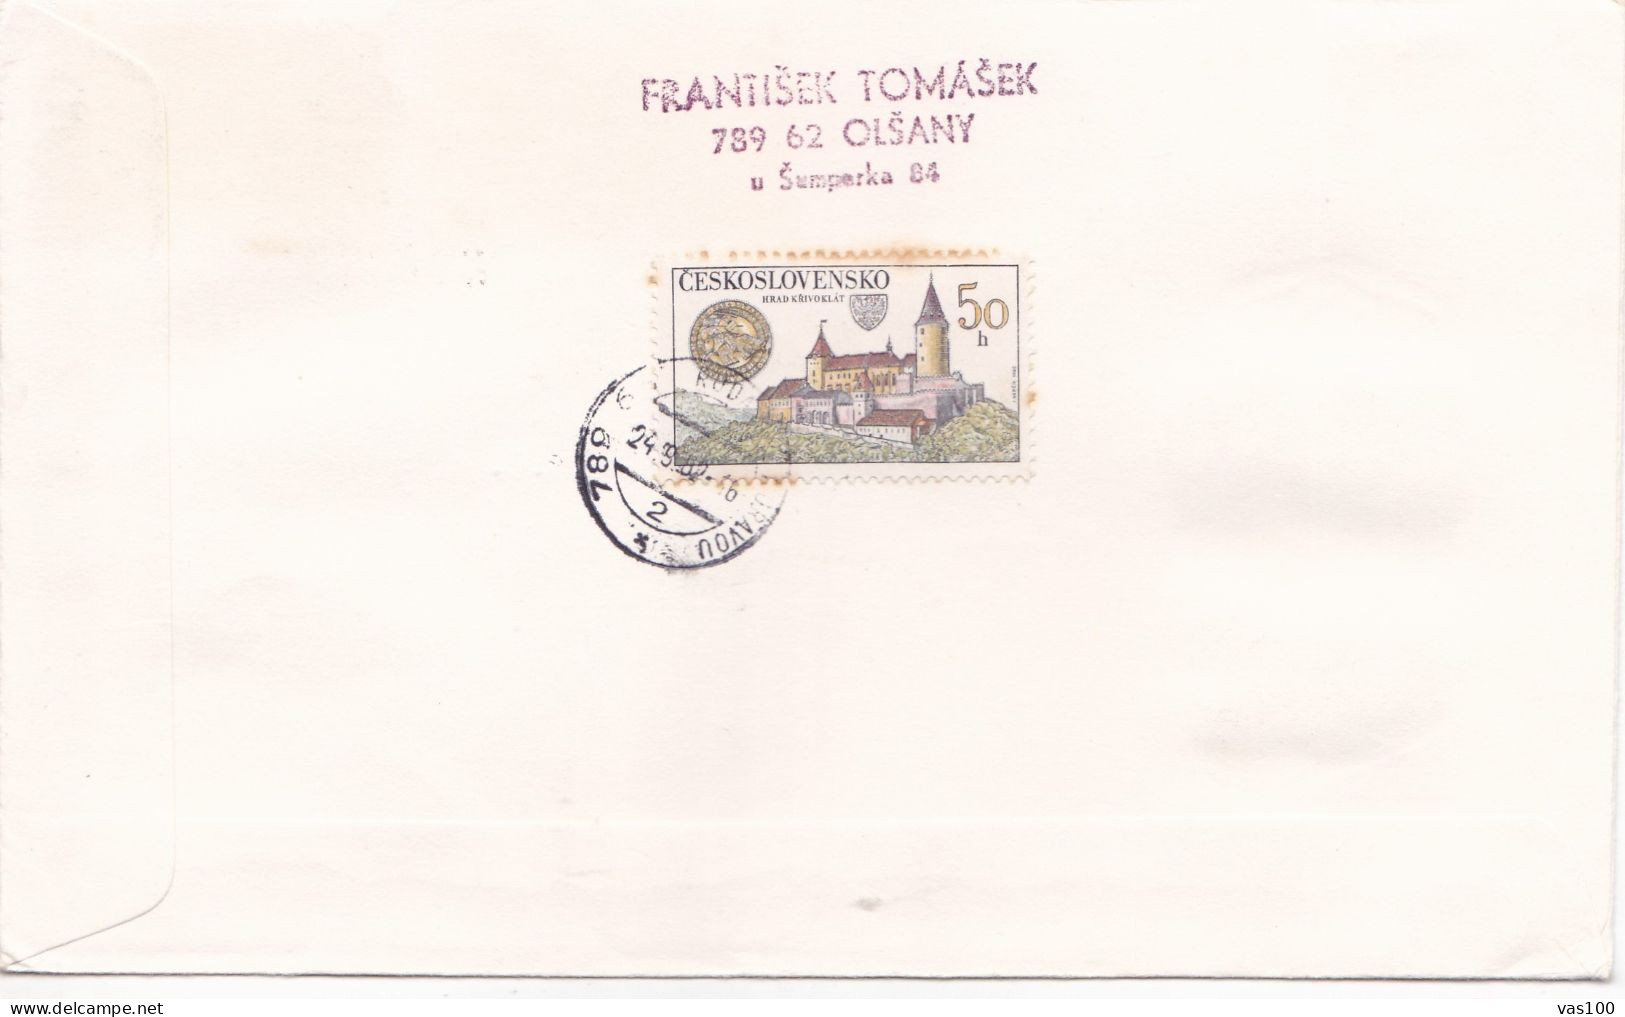 ARHITECTURE 2 COVERS FDC  CIRCULATED 1982 Tchécoslovaquie - Lettres & Documents